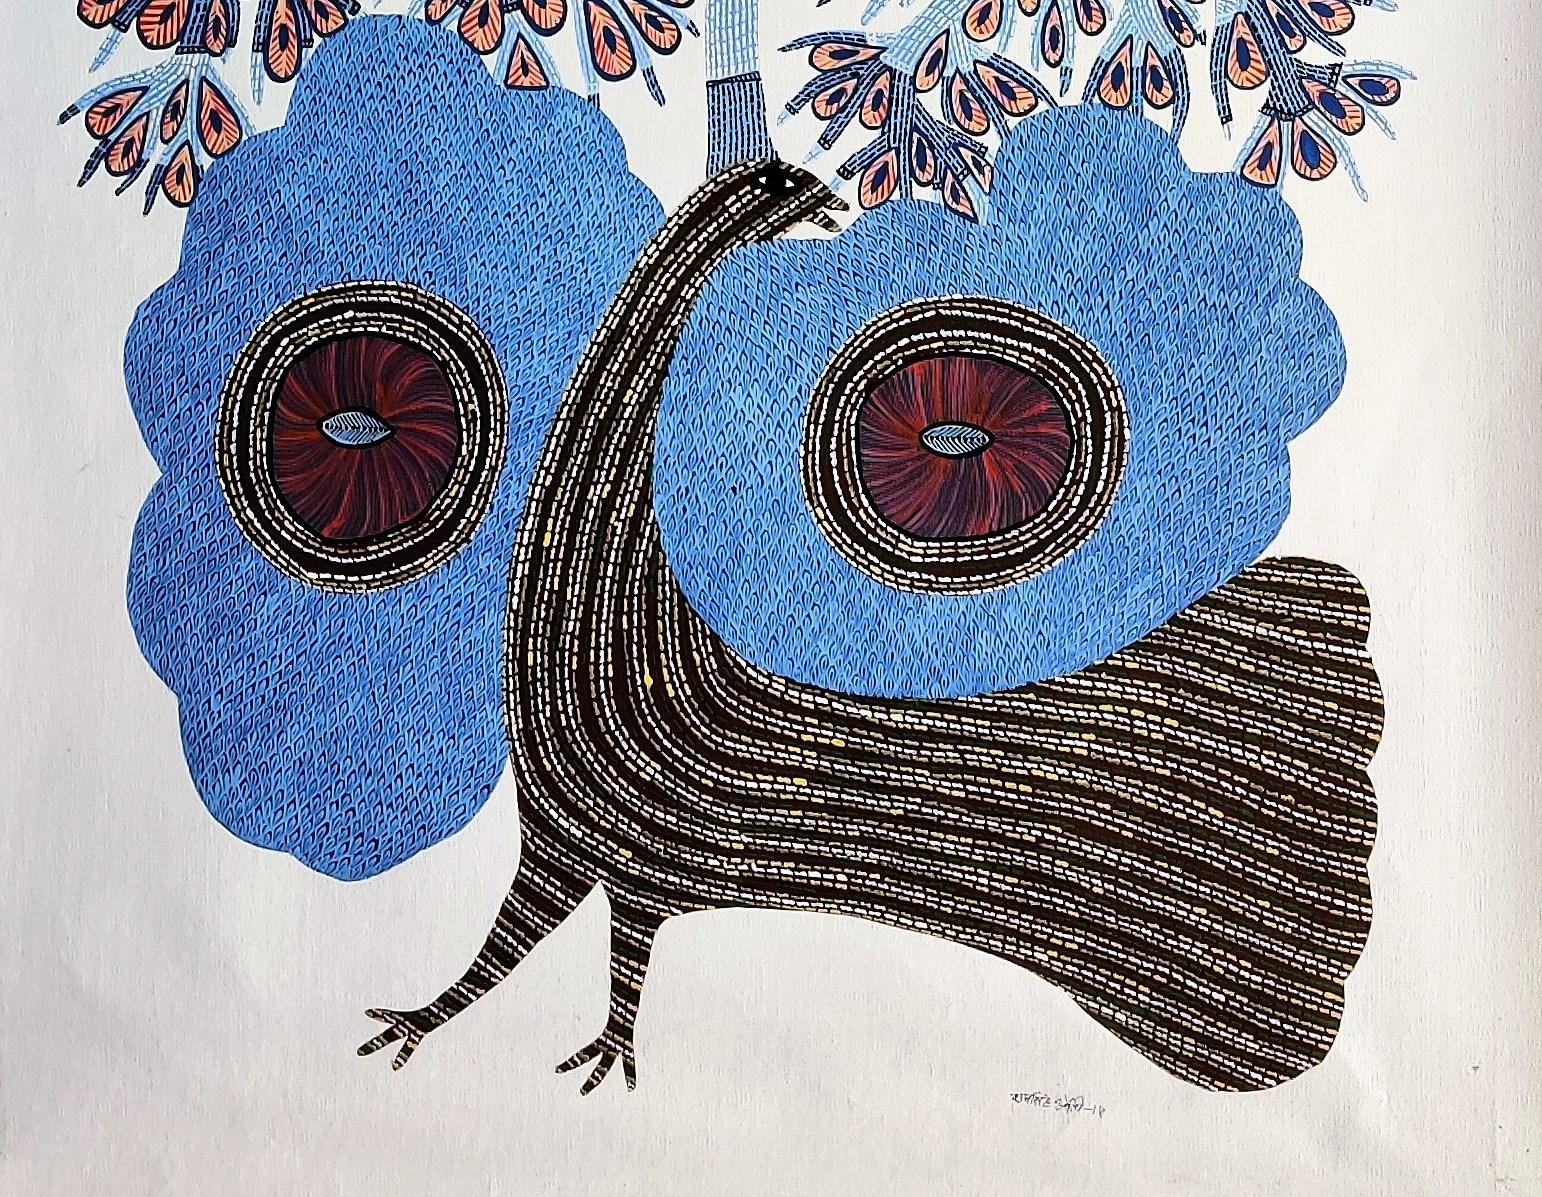 Acrylic paint and ink on canvas 
Unique work
Signed lower right
Ram Singh Urveti is part of the Gond tribe in the center of India.